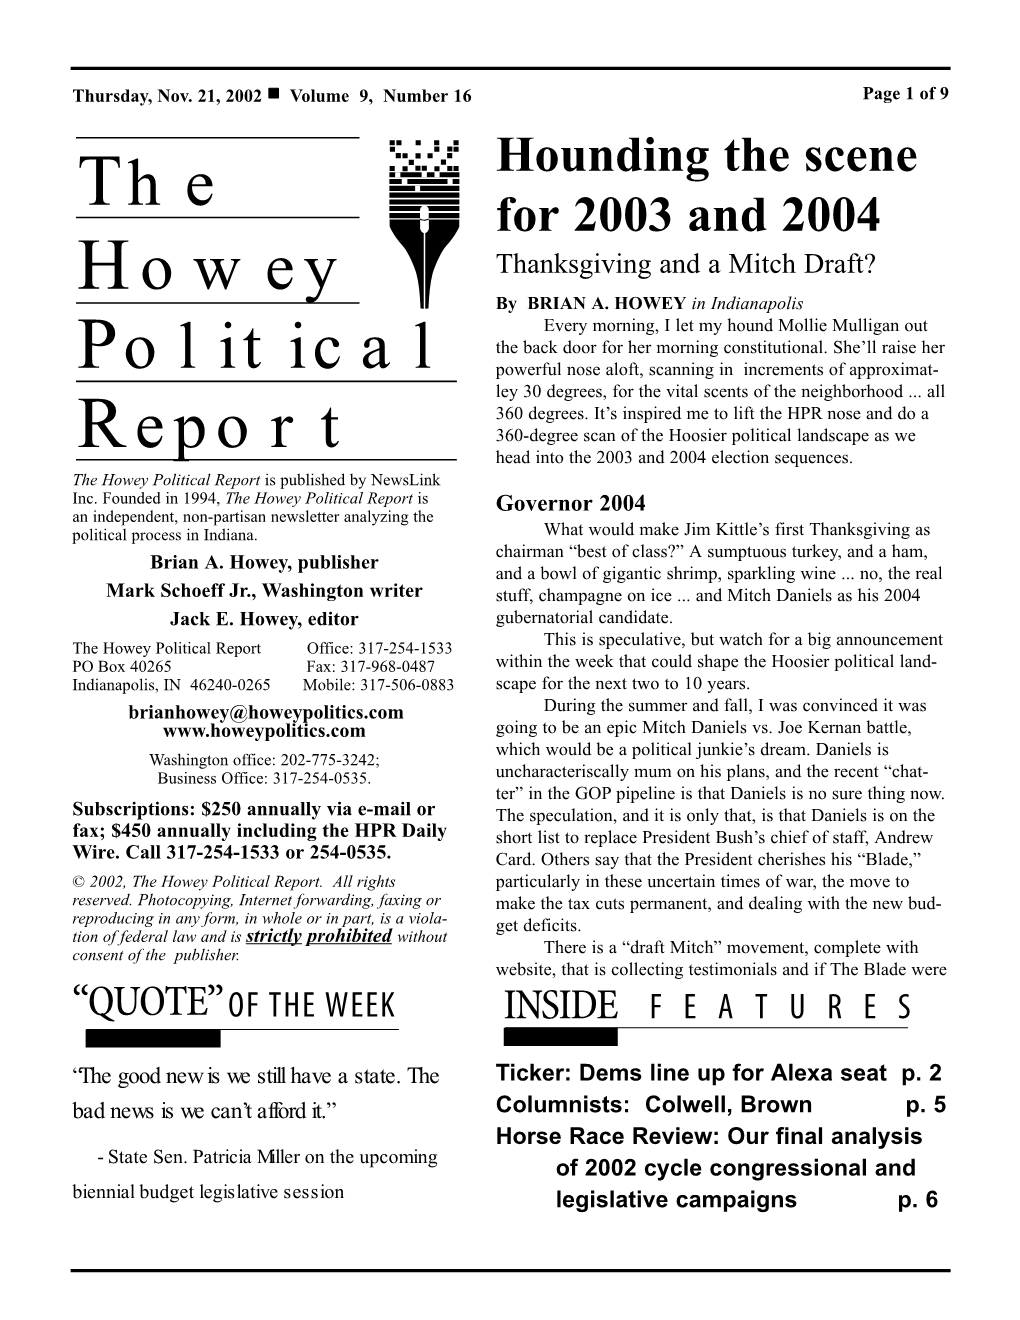 The Howey Political Report Is Published by Newslink Inc